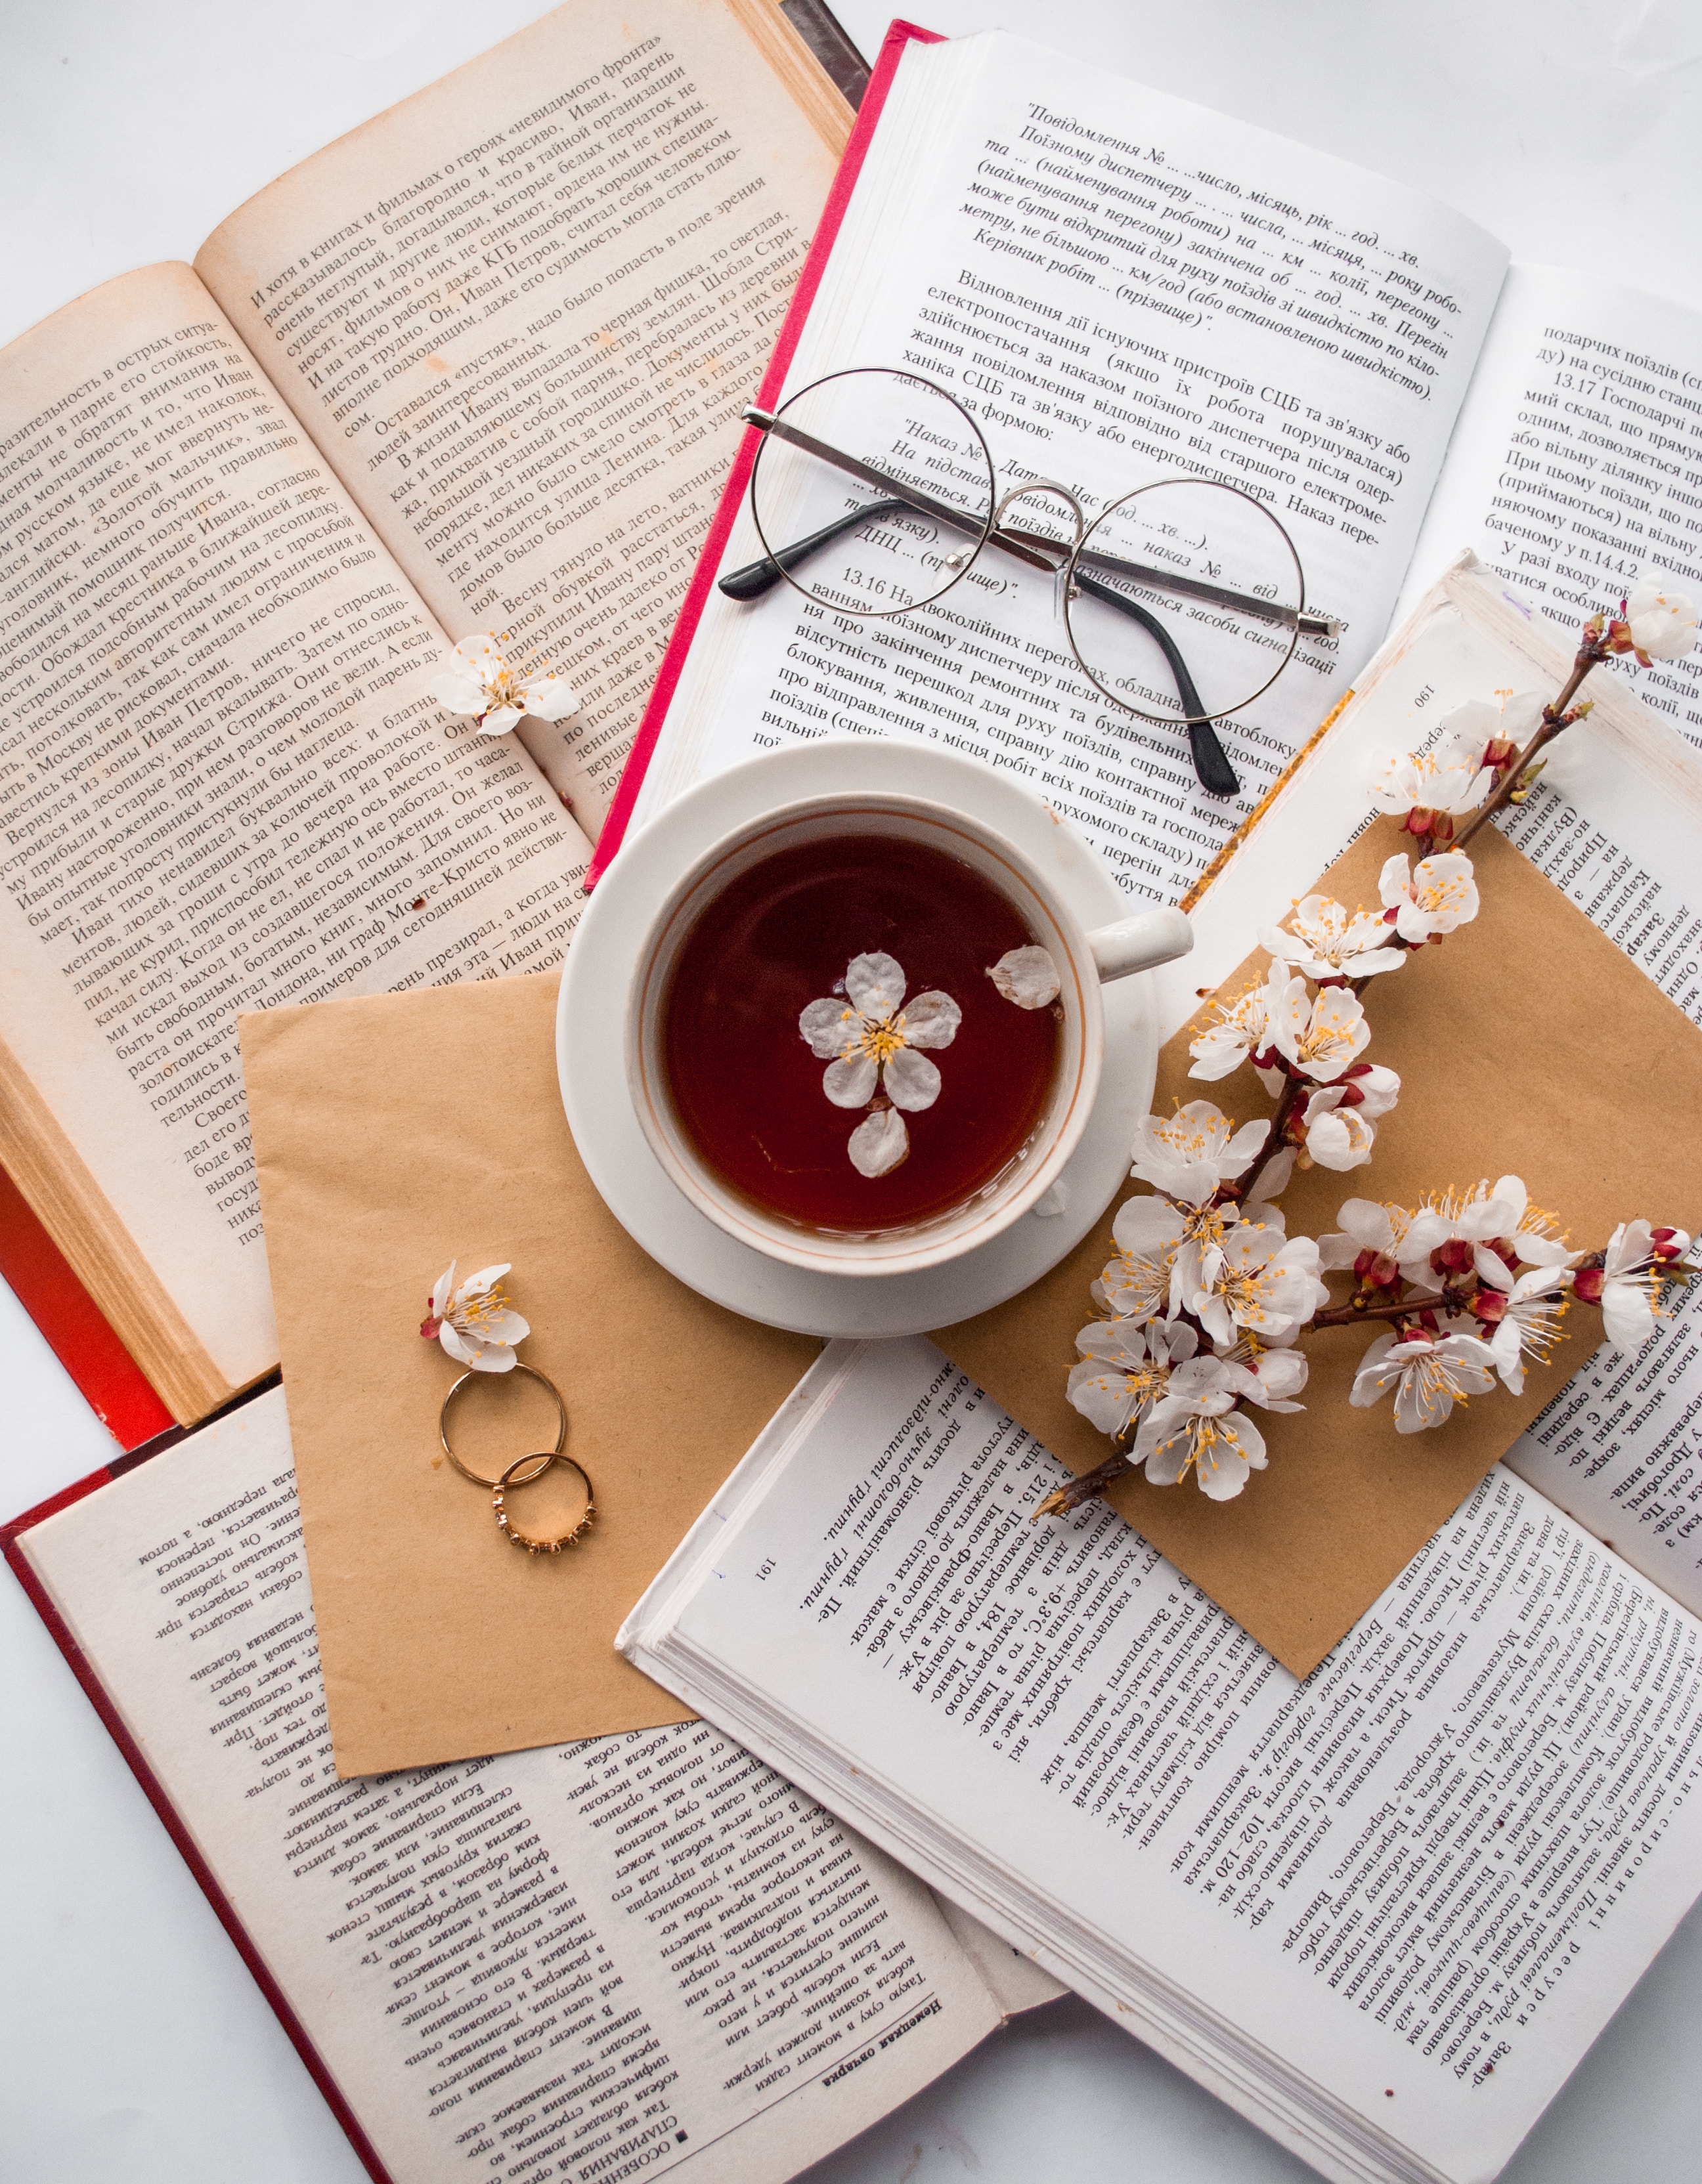 books, flowers, rings, miscellanea, miscellaneous, cup, glasses, spectacles download HD wallpaper